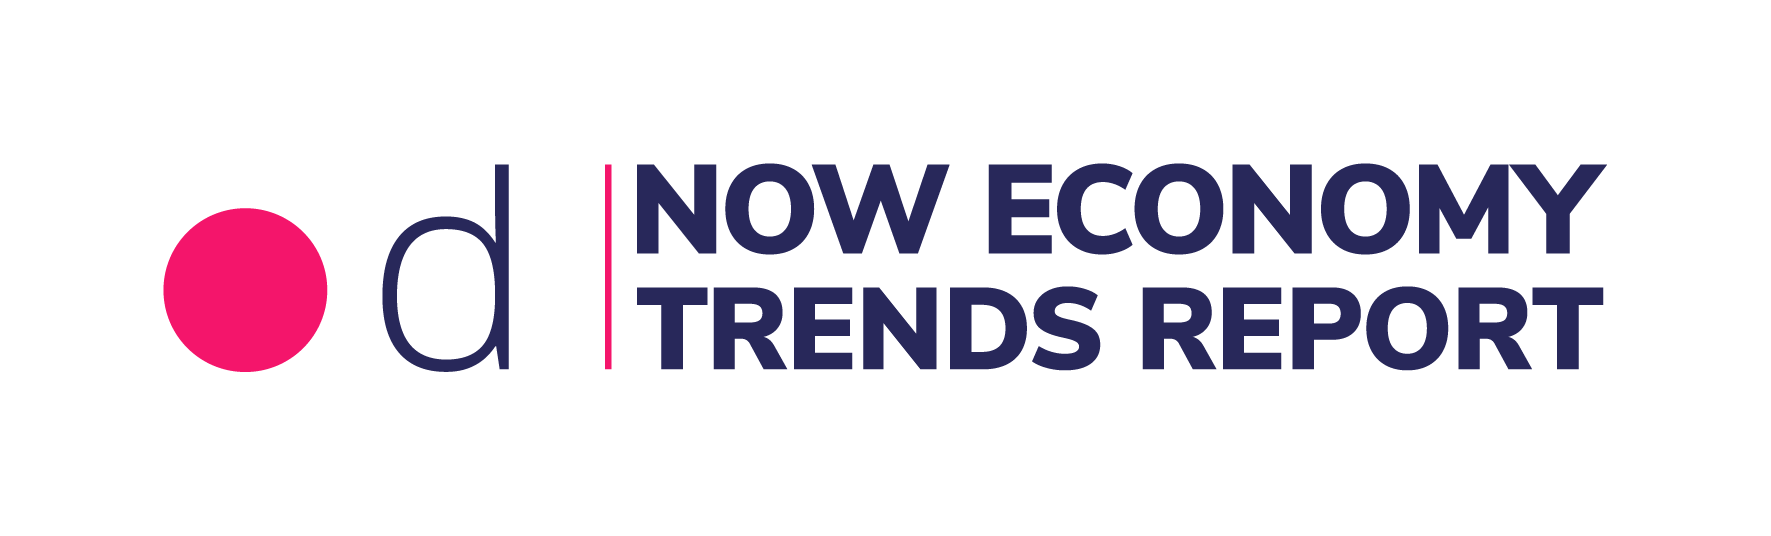 Delineate Now Economy Trends Report - Find out more